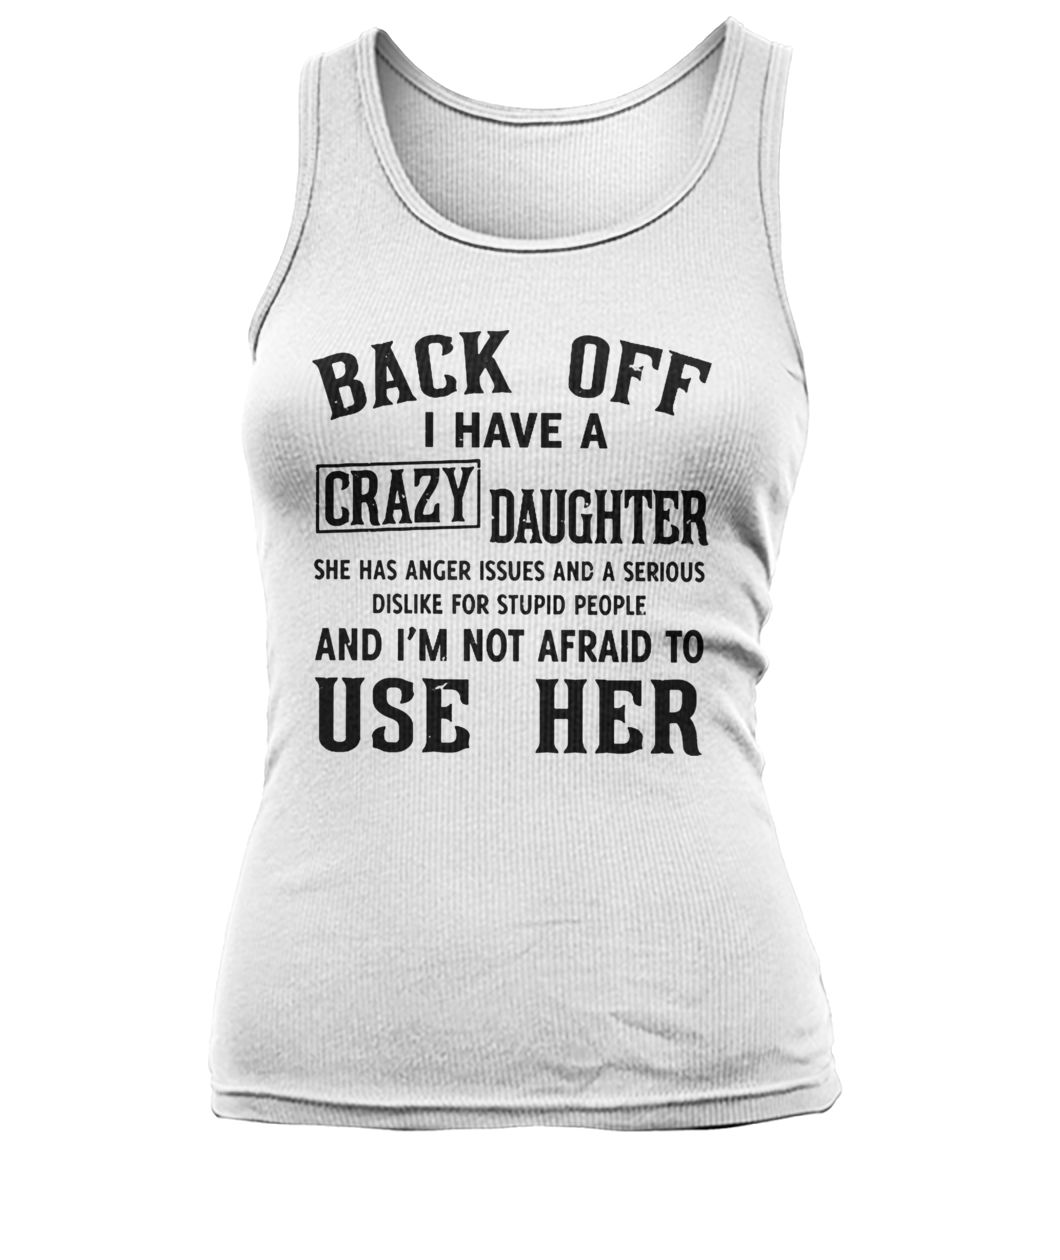 Back off I have a crazy daughter she has anger issues and a serious dislike for stupid people women's tank top